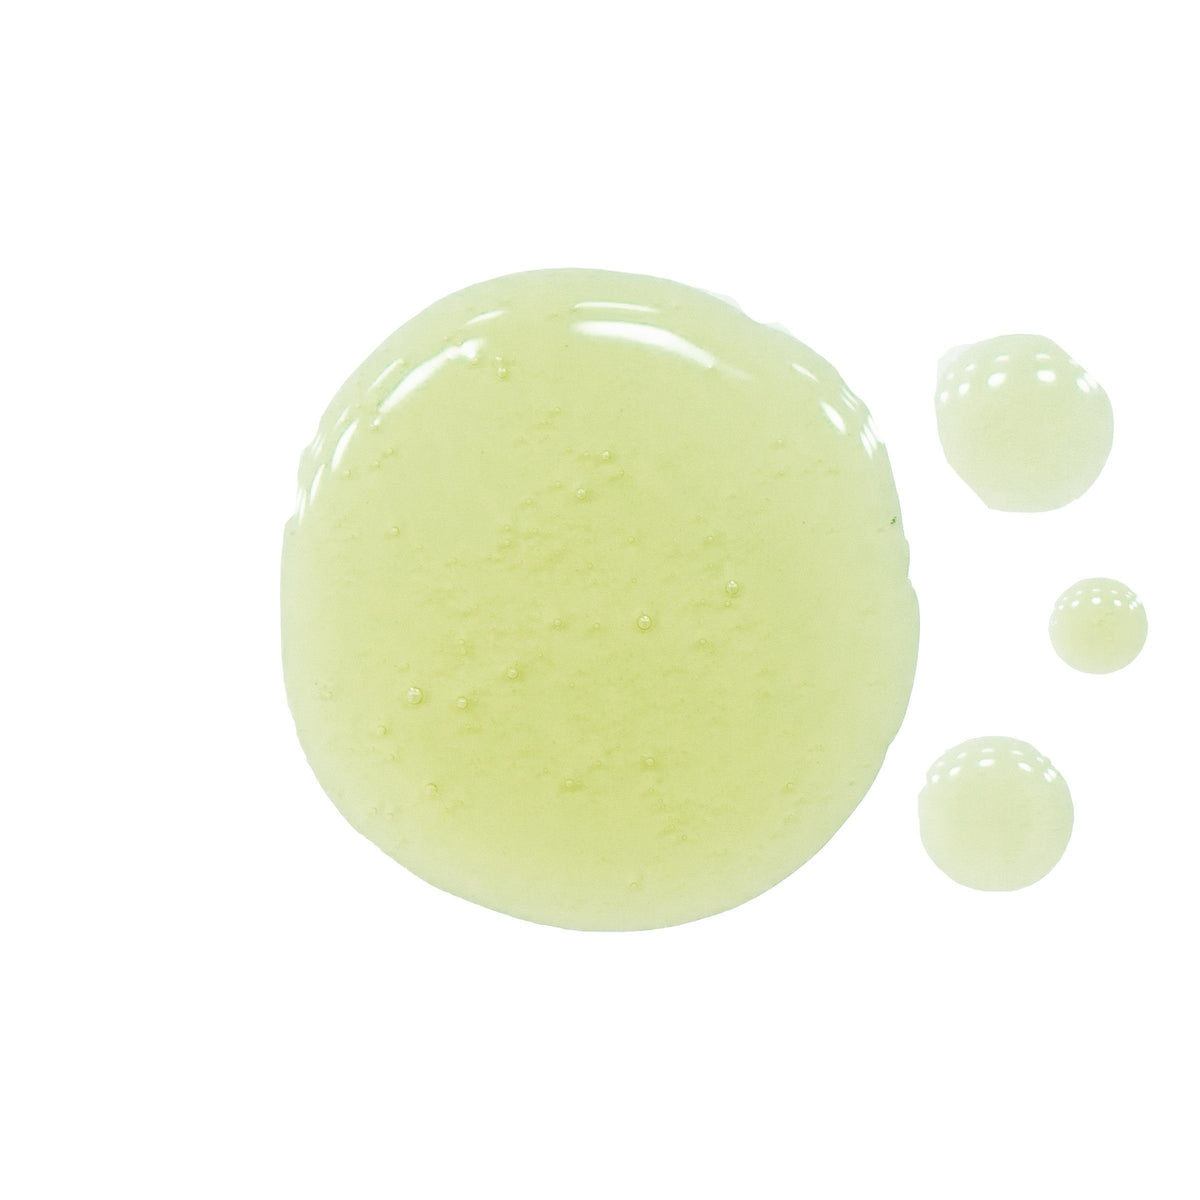 Pura Cleansing Oil swatch on white background